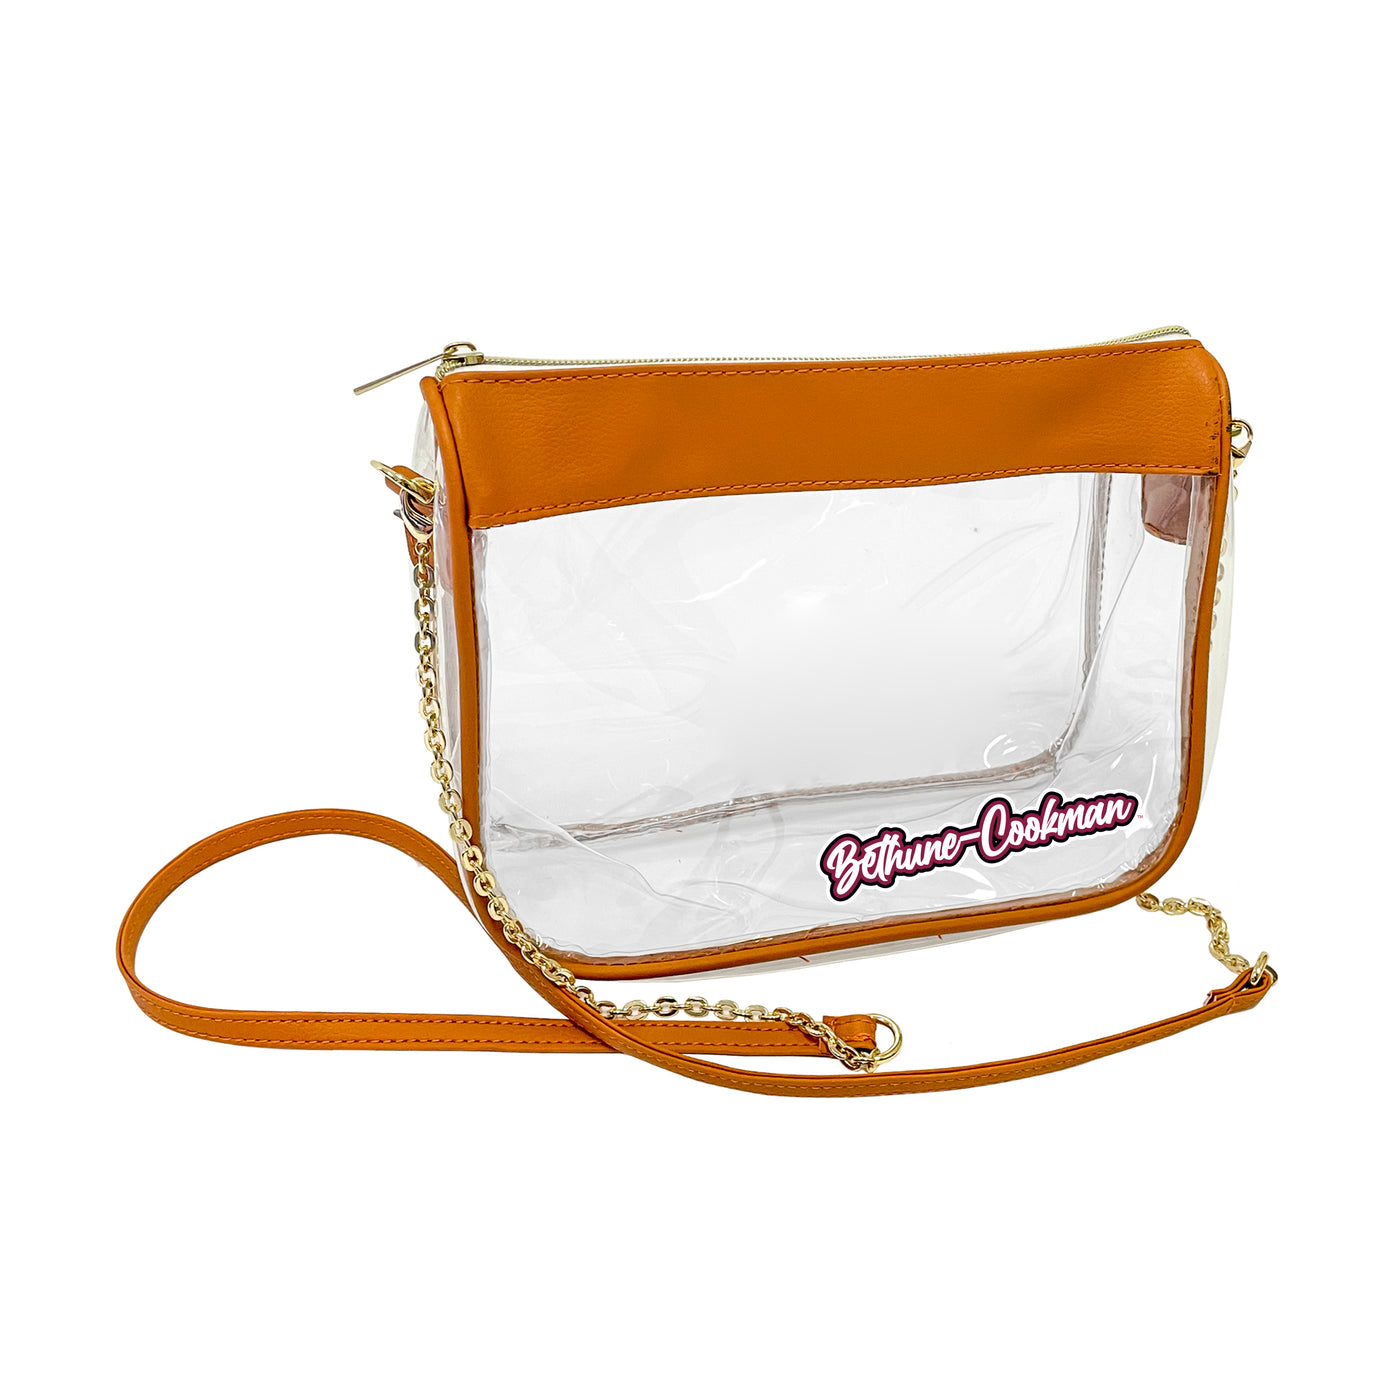 Bethune-Cookman Hype Clear Bag